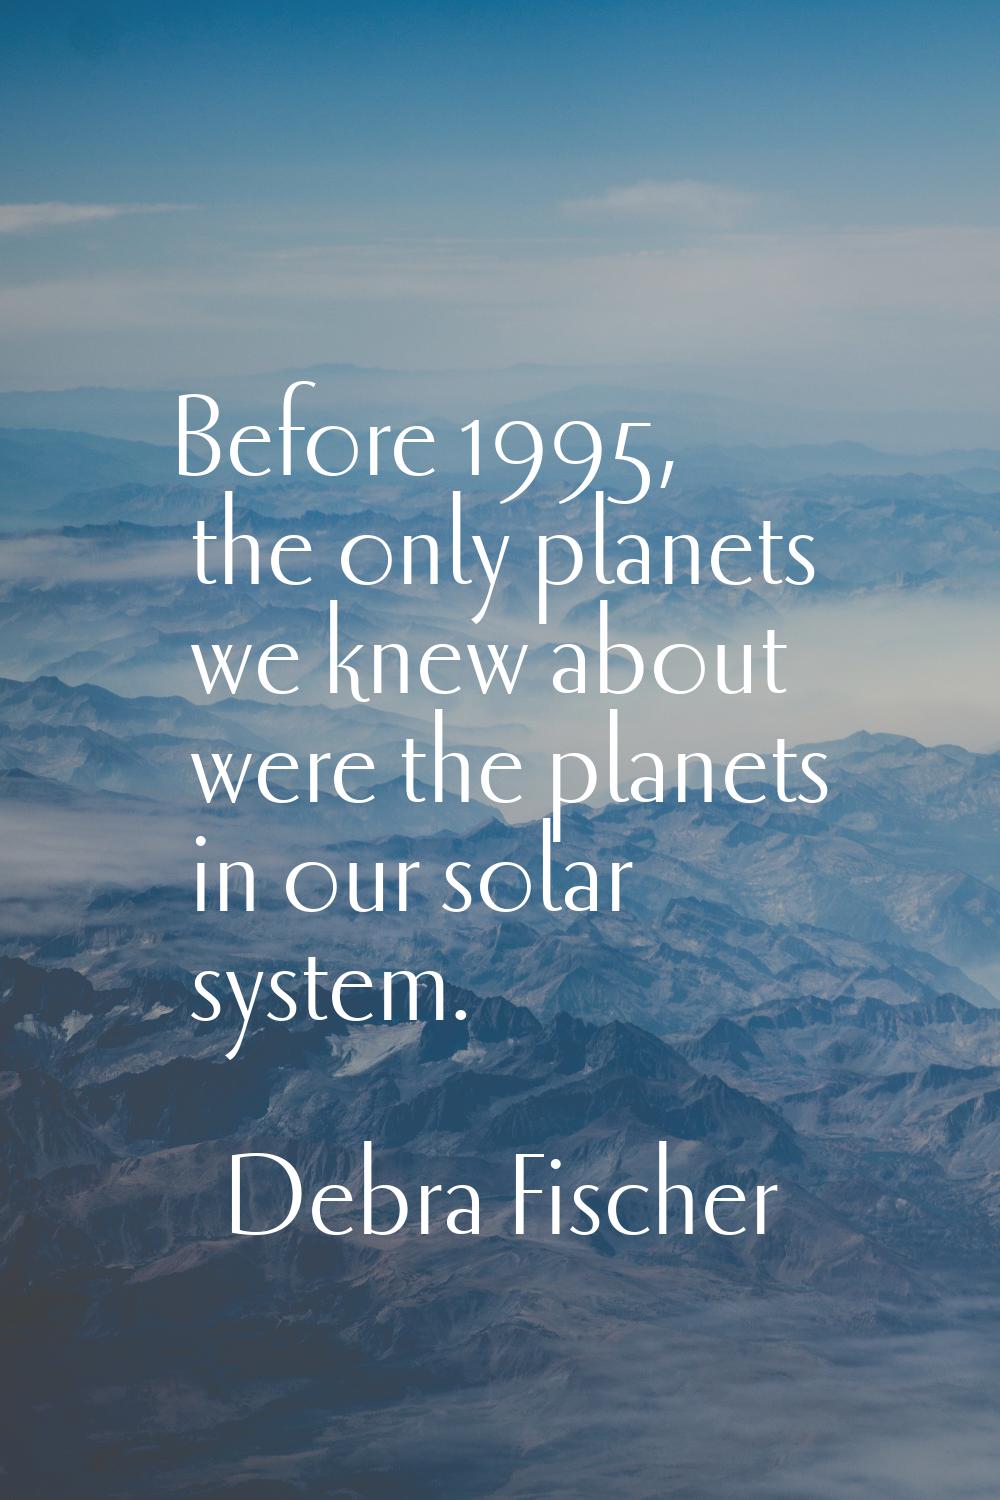 Before 1995, the only planets we knew about were the planets in our solar system.